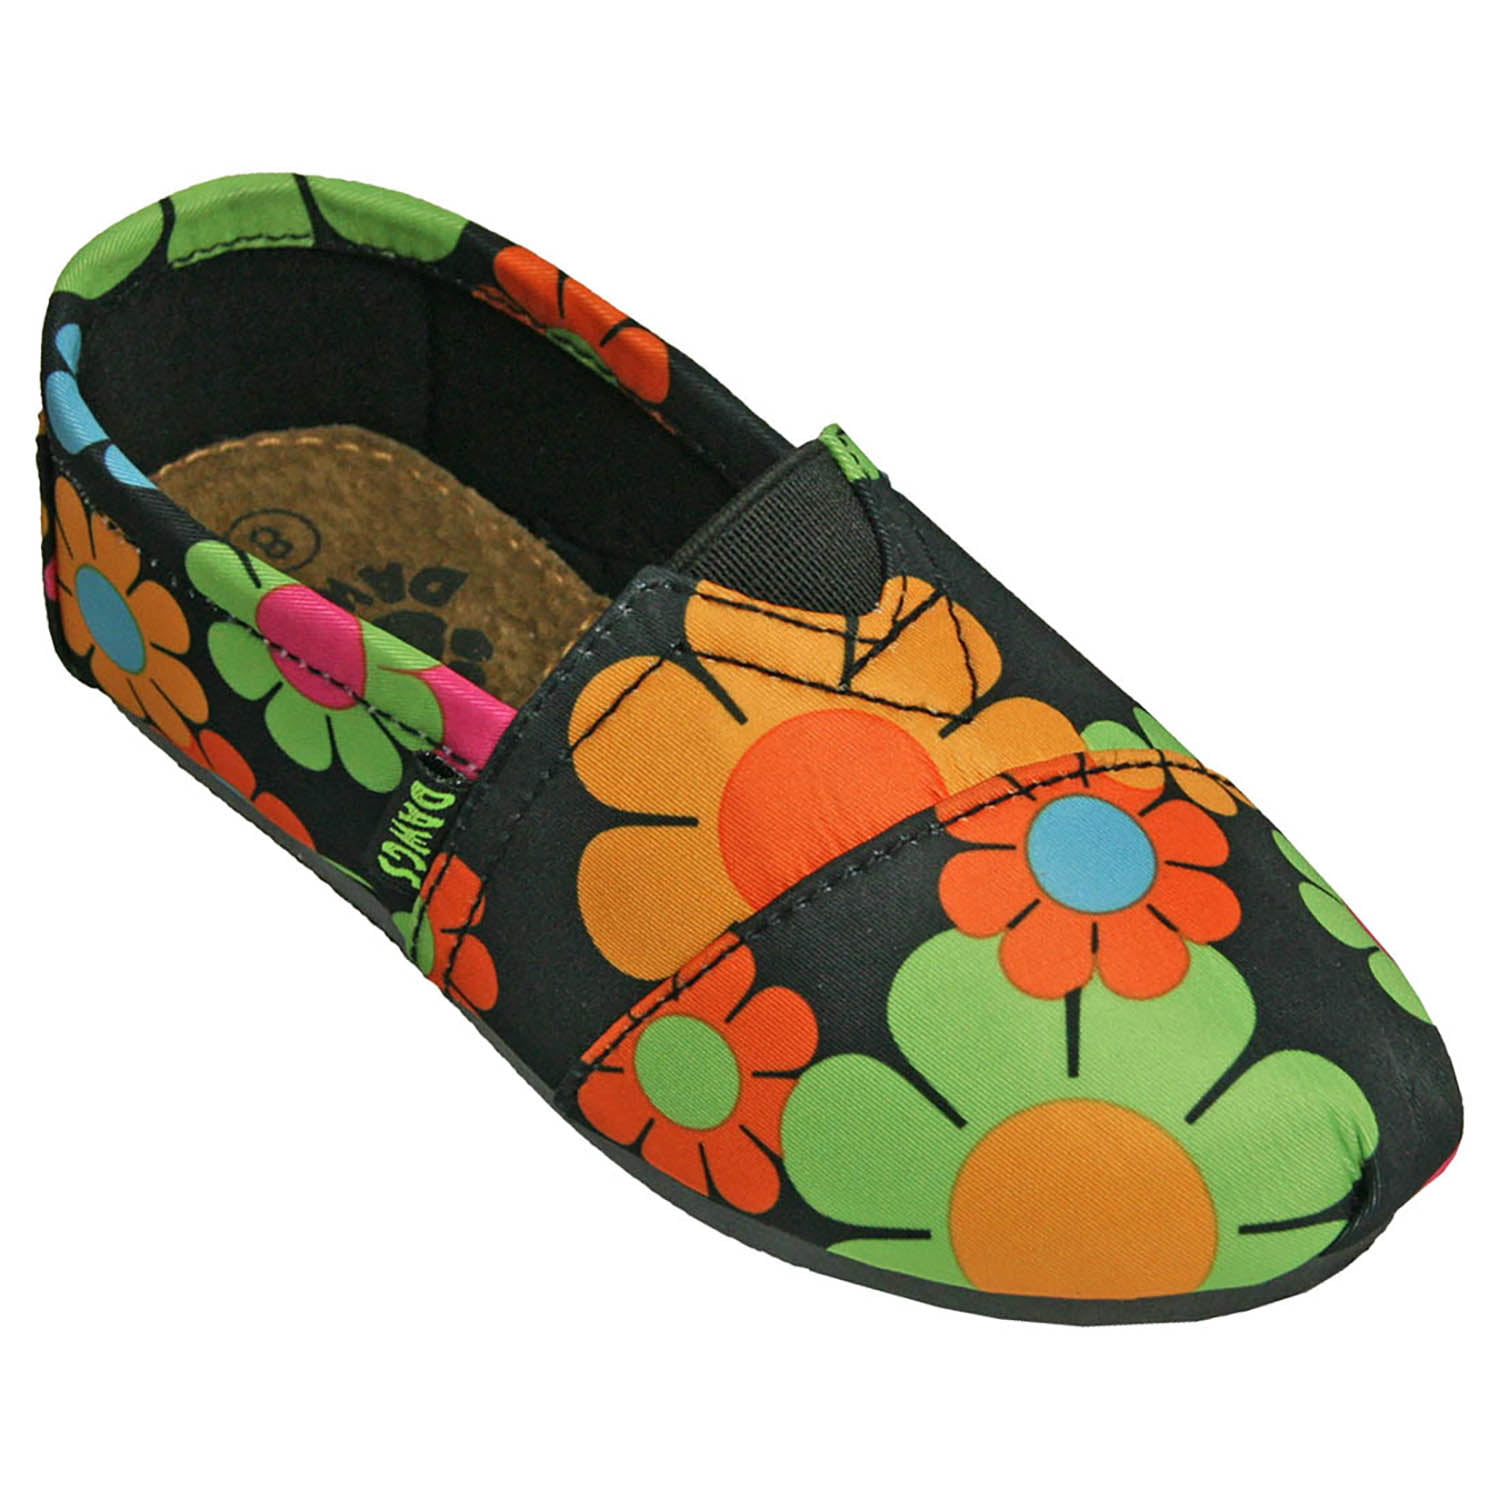 Toddler/Little Kid DAWGS Kaymann Loudmouth Loafer